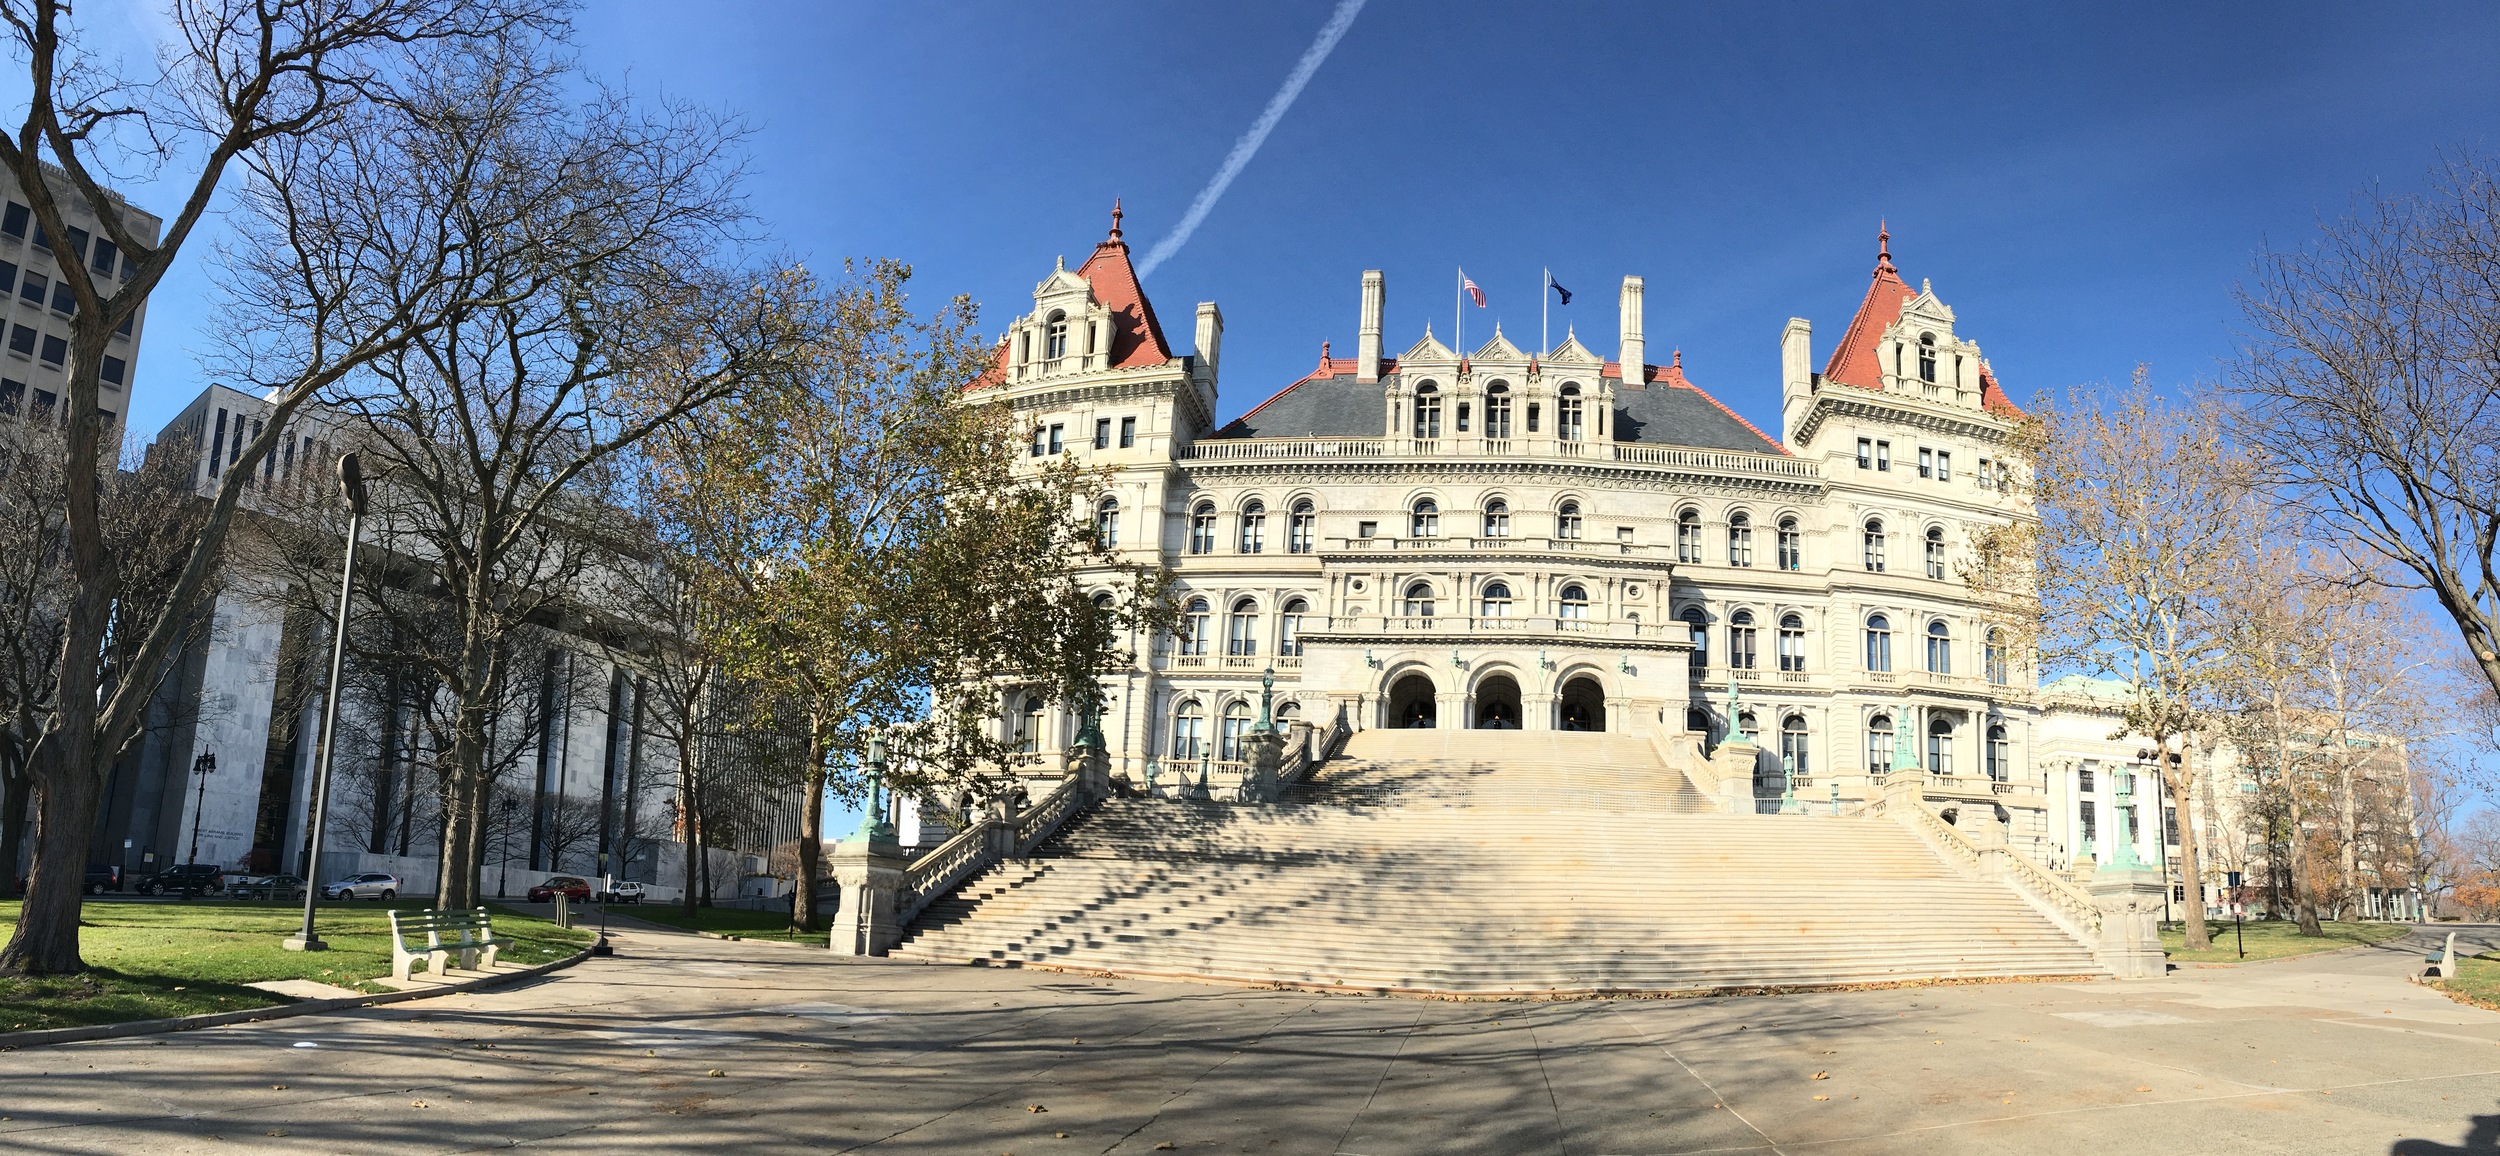 State Capitol, Albany, New York, 2015